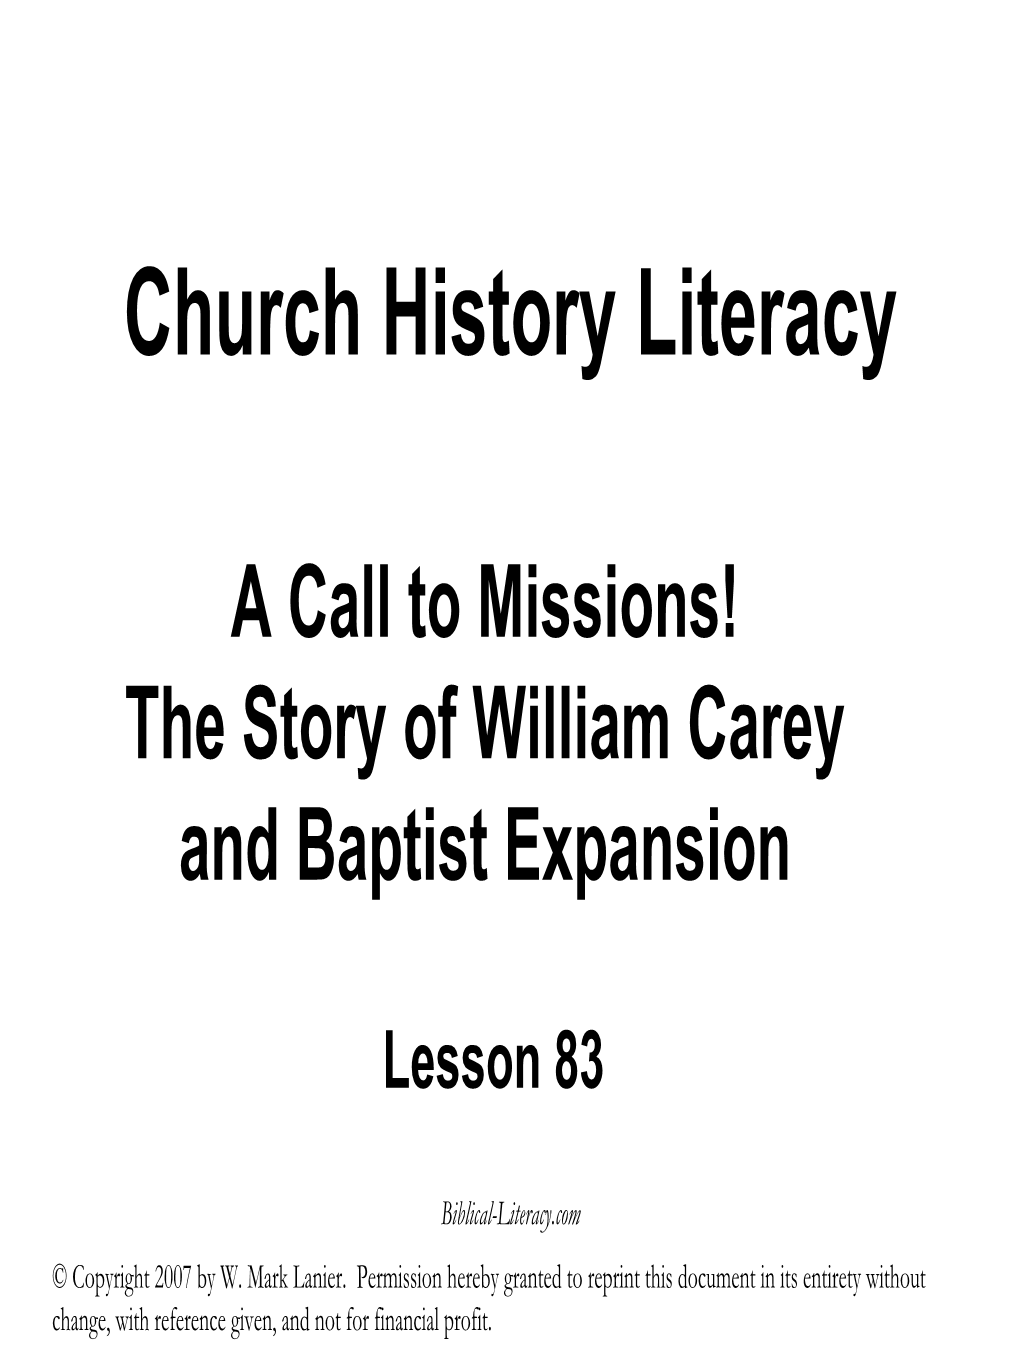 The Story of William Carey and Baptist Expansion